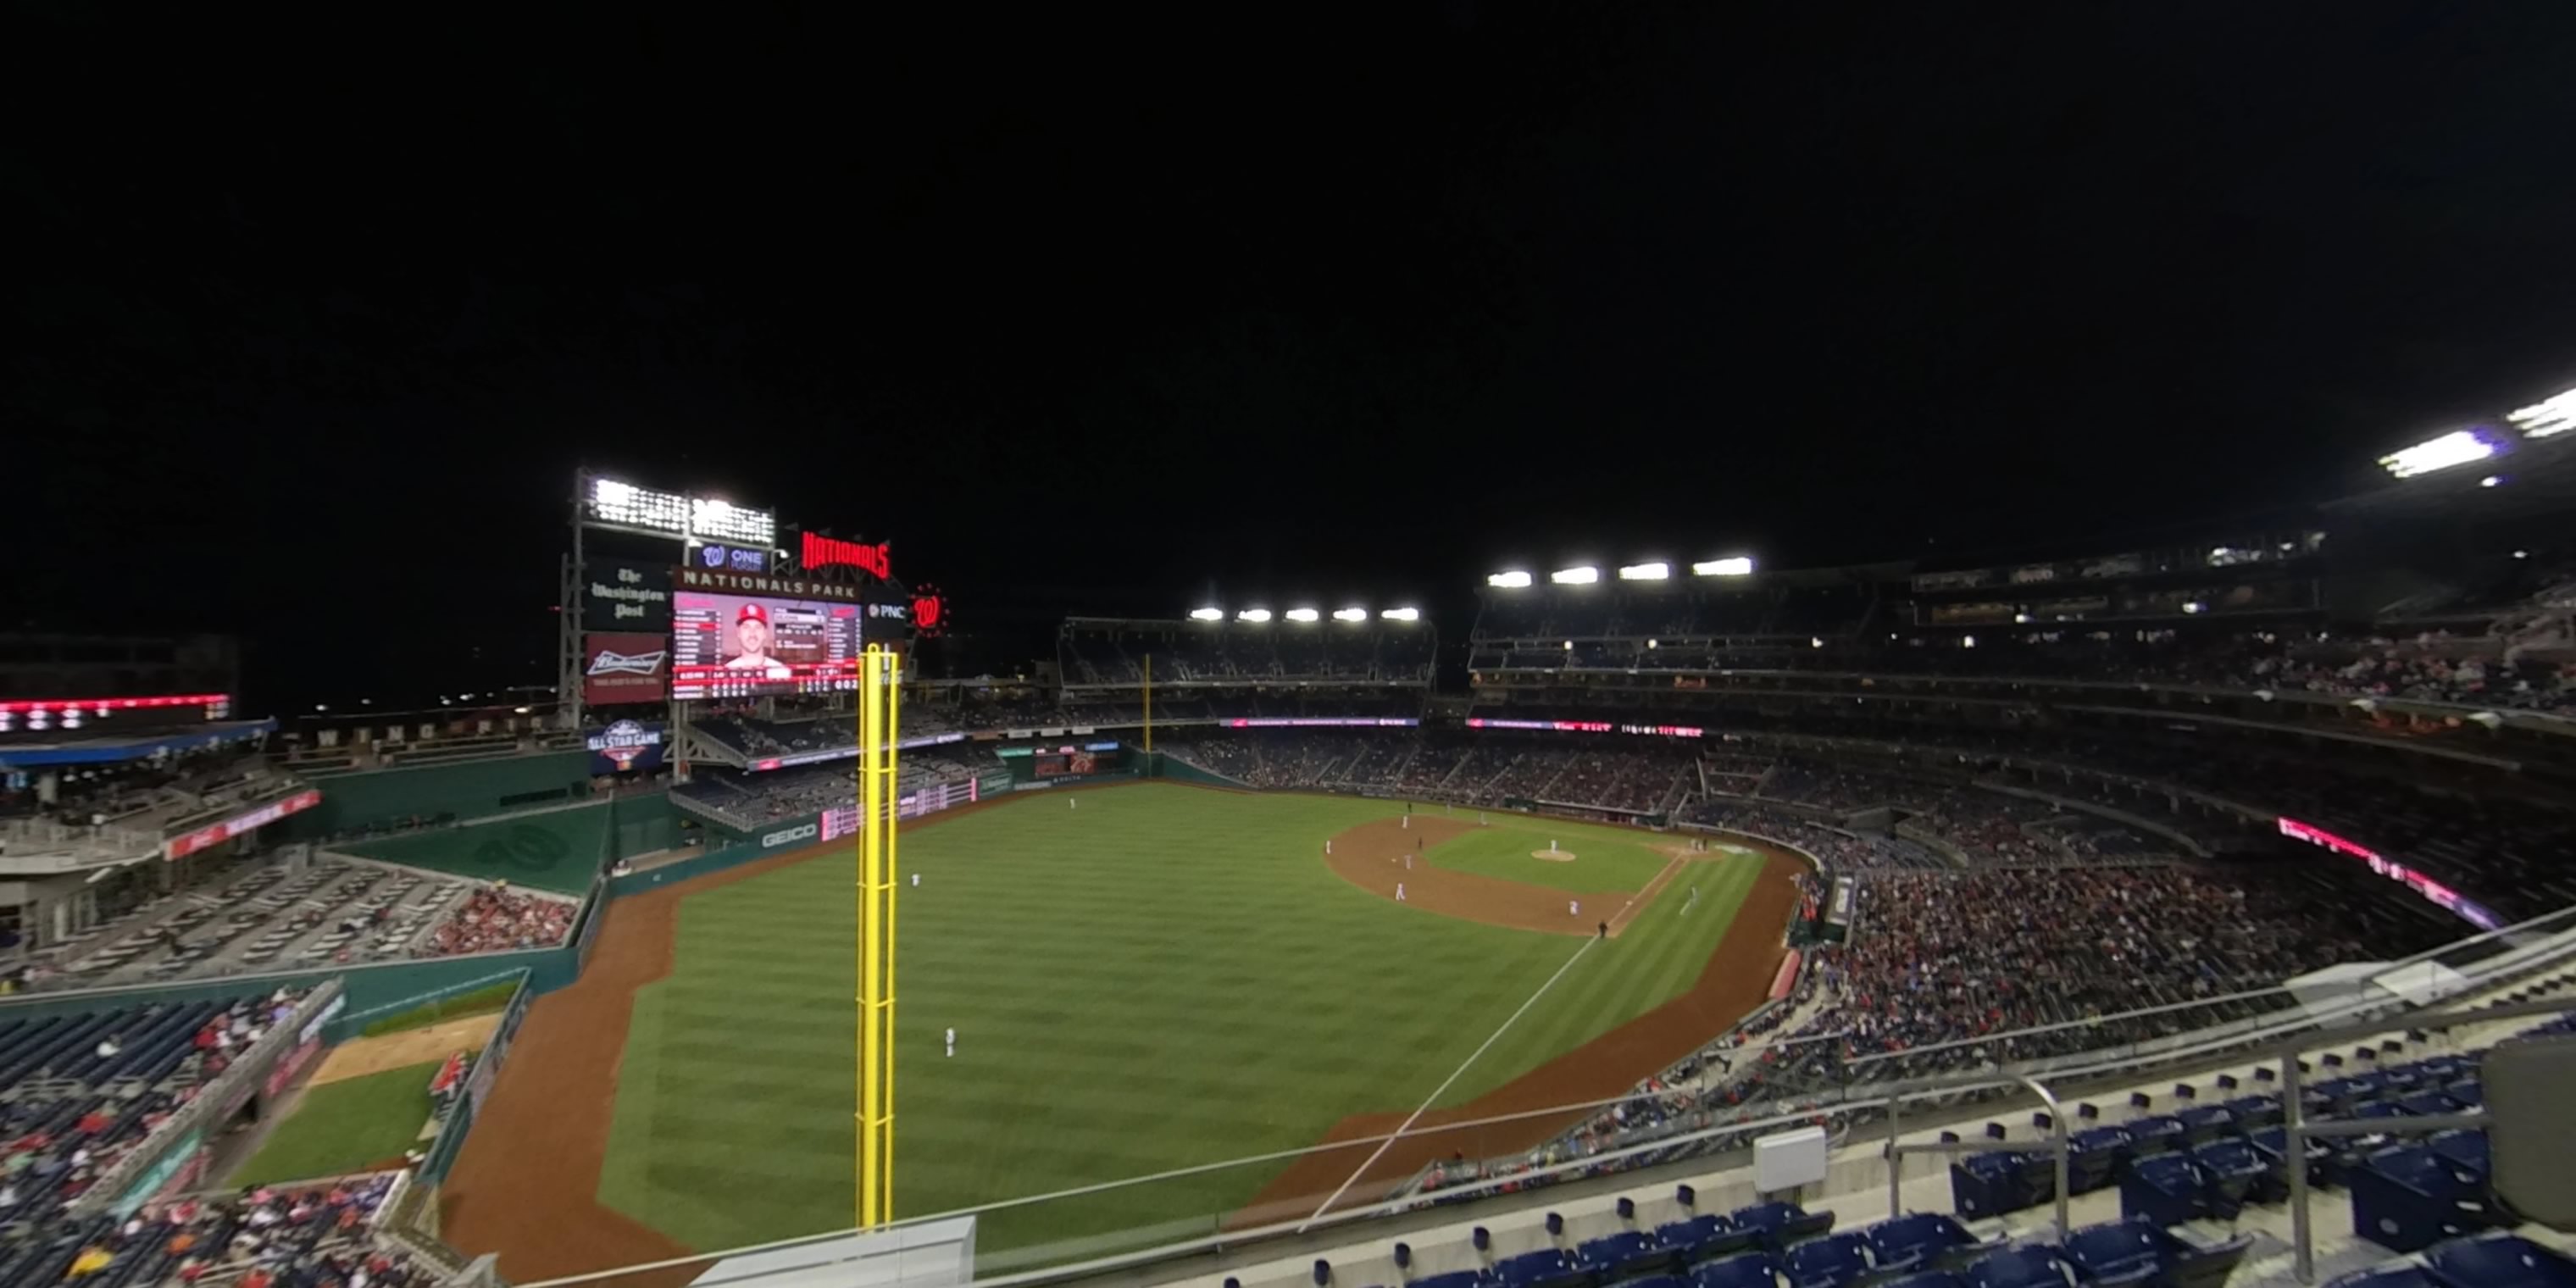 section 301 panoramic seat view  for baseball - nationals park